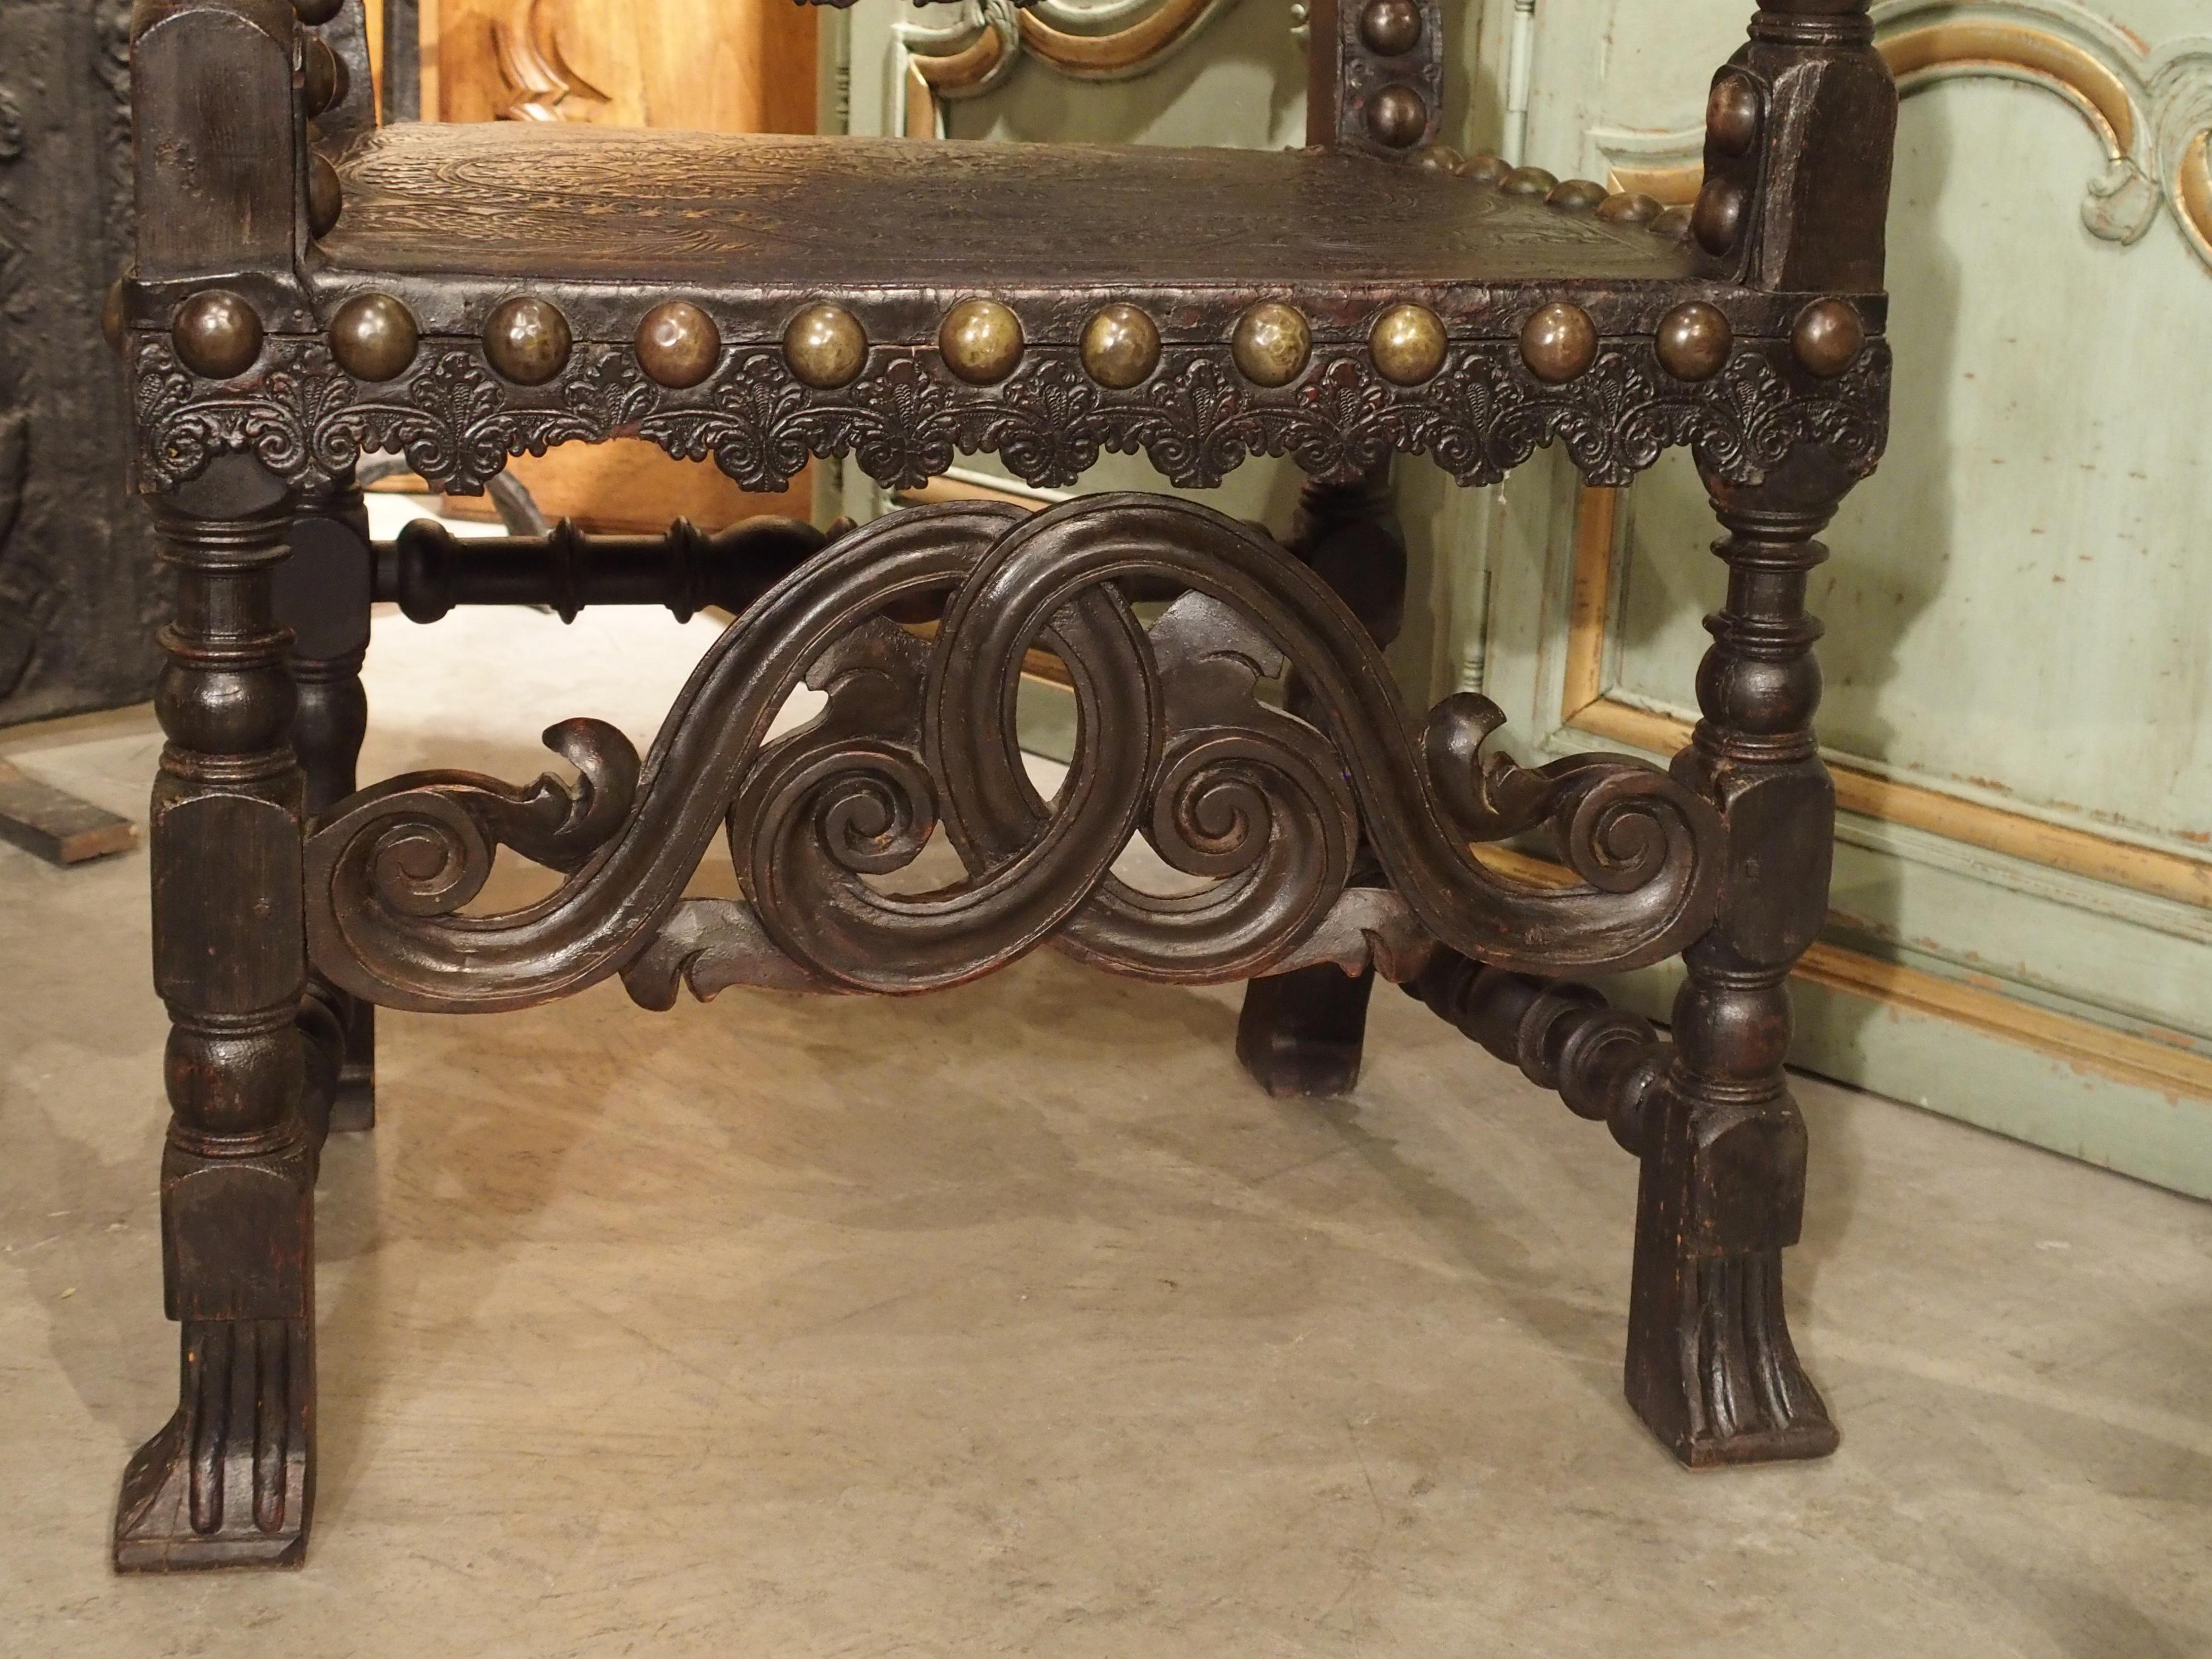 17th century and later

From Spain, these richly tooled leather and oak armchairs date to the 1600s and later. The leather is fastened to the frames with large brass nail heads, and the tooled leather is very elaborate and ornate in its designs.